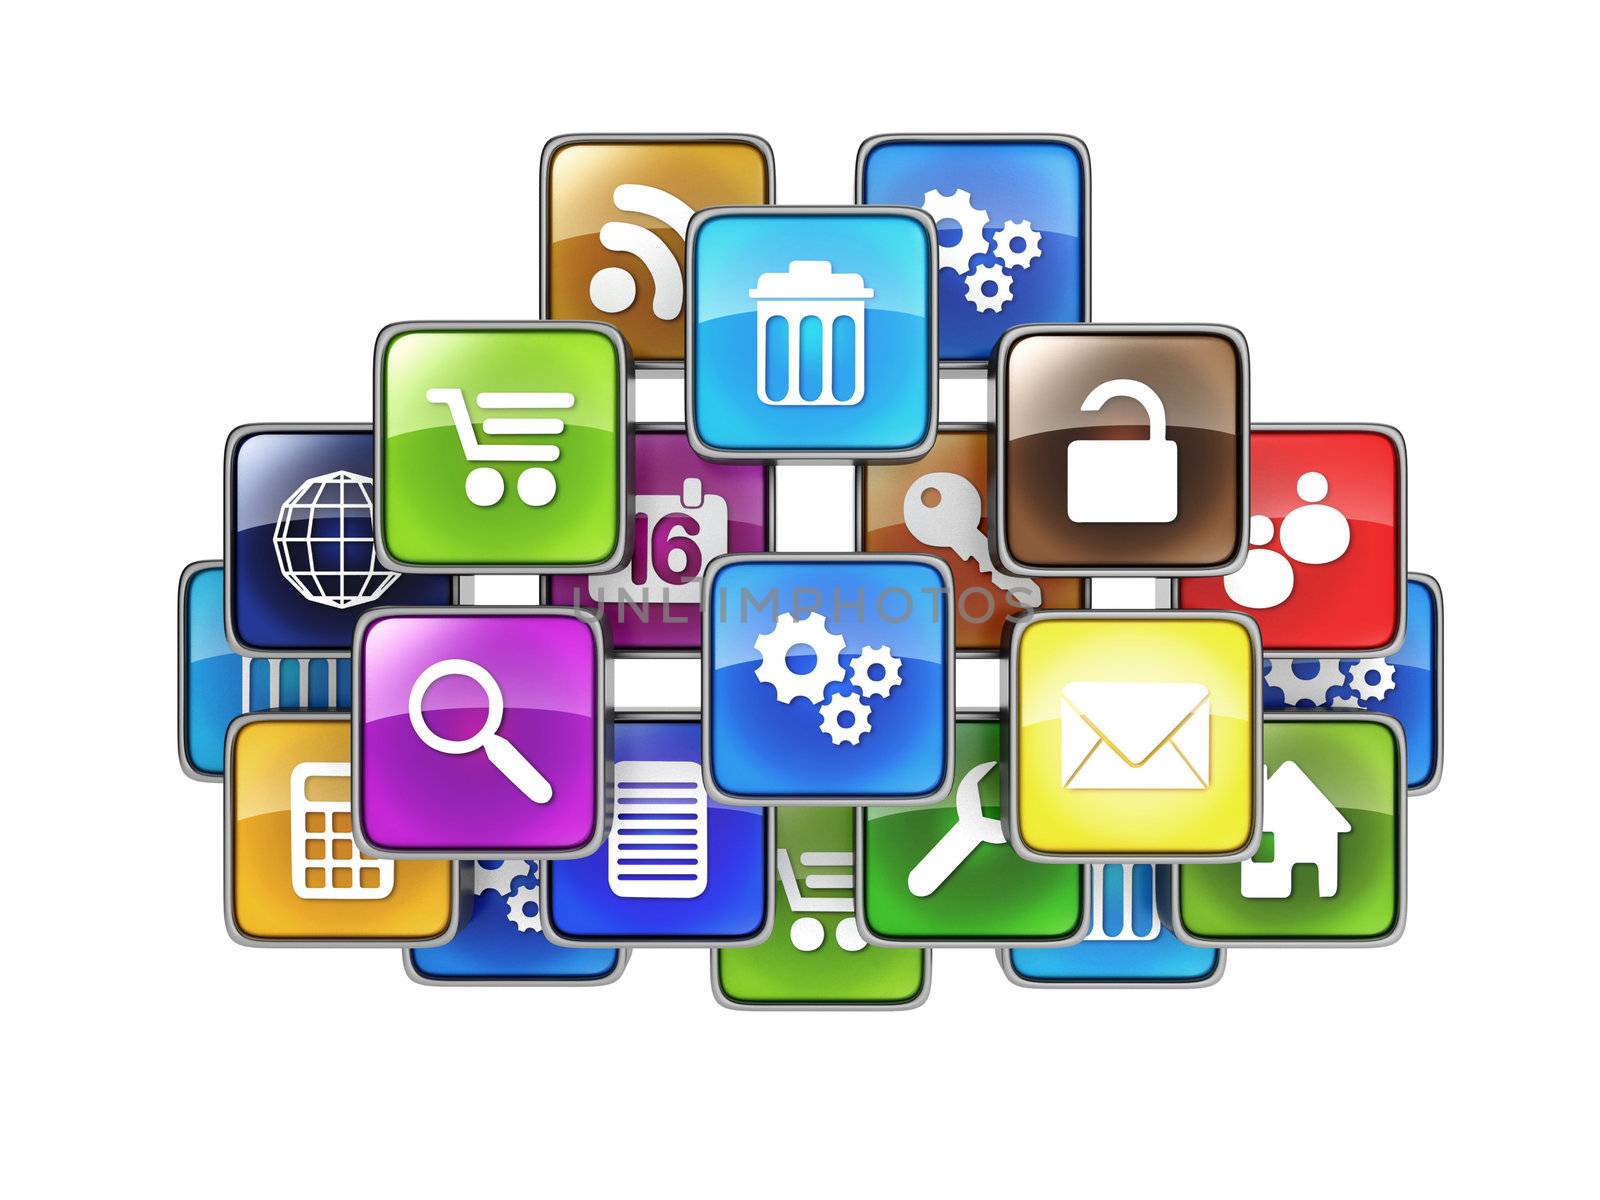 Group of mobile applications in the form of icons drawn in the cloud